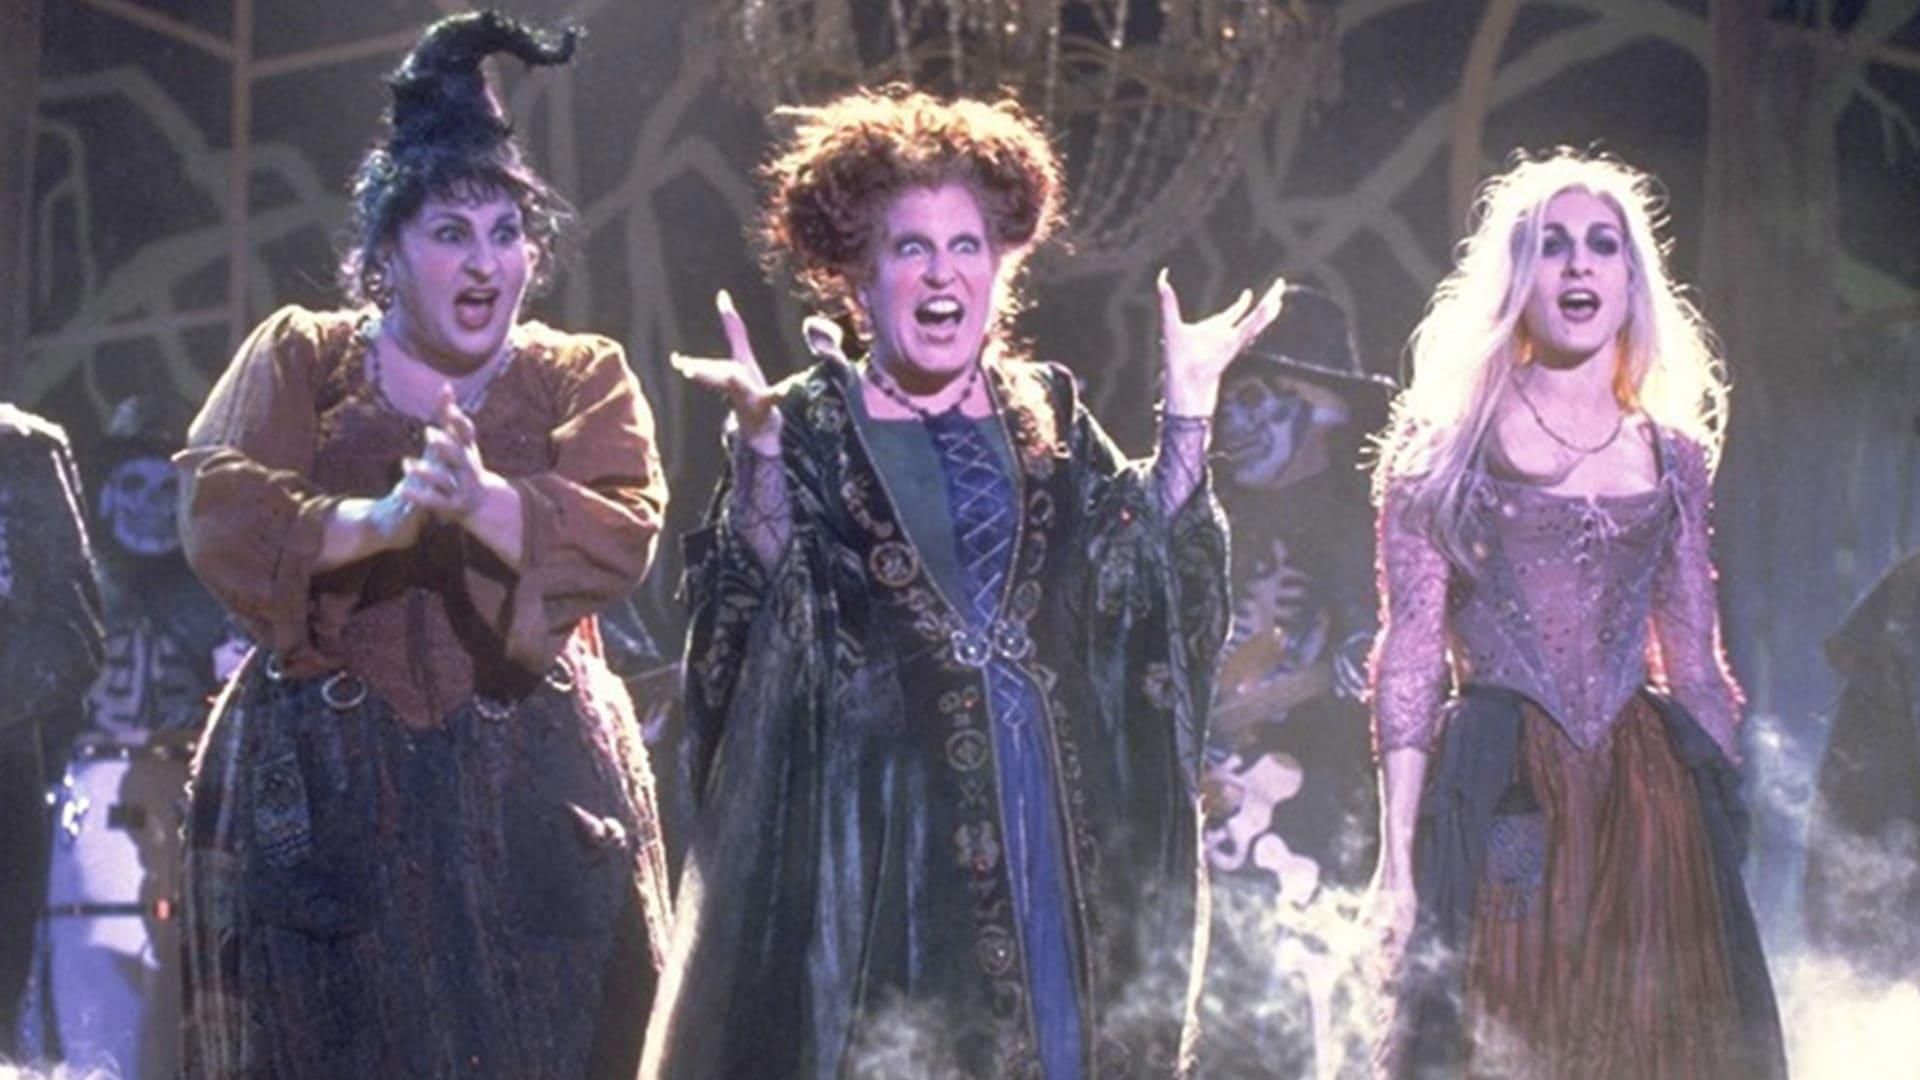 In Search of the Sanderson Sisters: A Hocus Pocus Hulaween Takeover backdrop